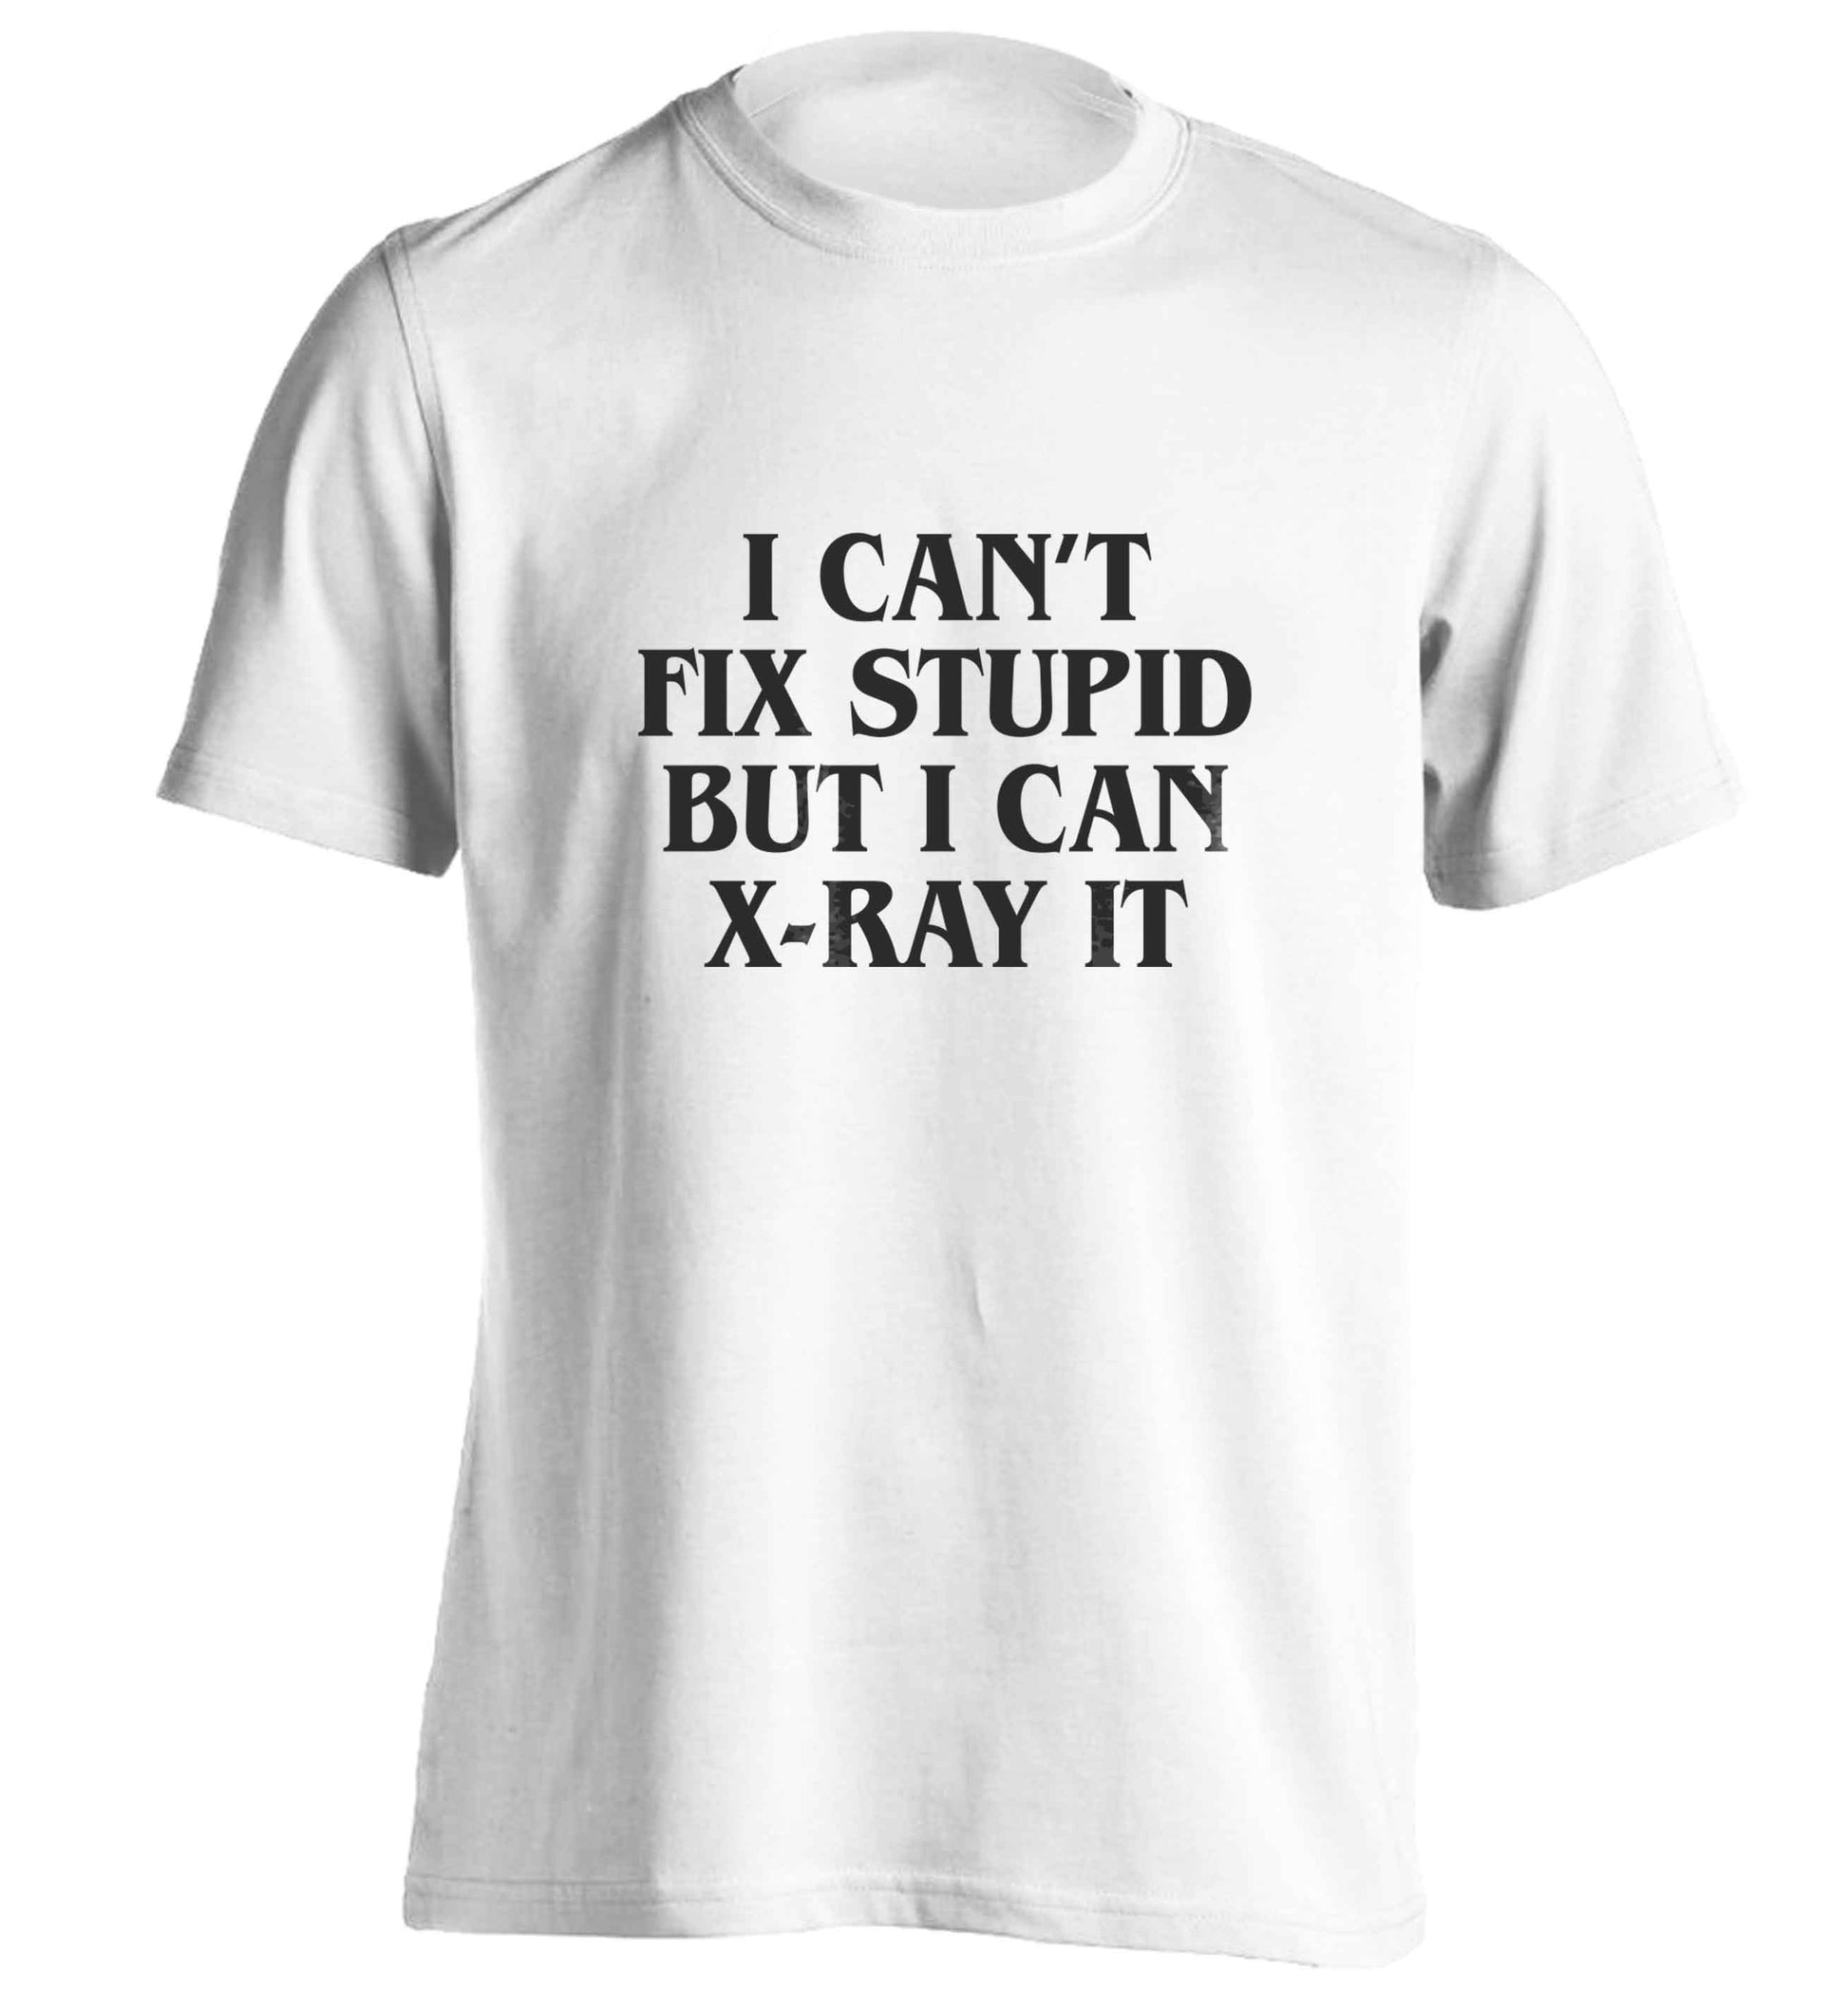 I can't fix stupid but I can X-Ray it adults unisex white Tshirt 2XL